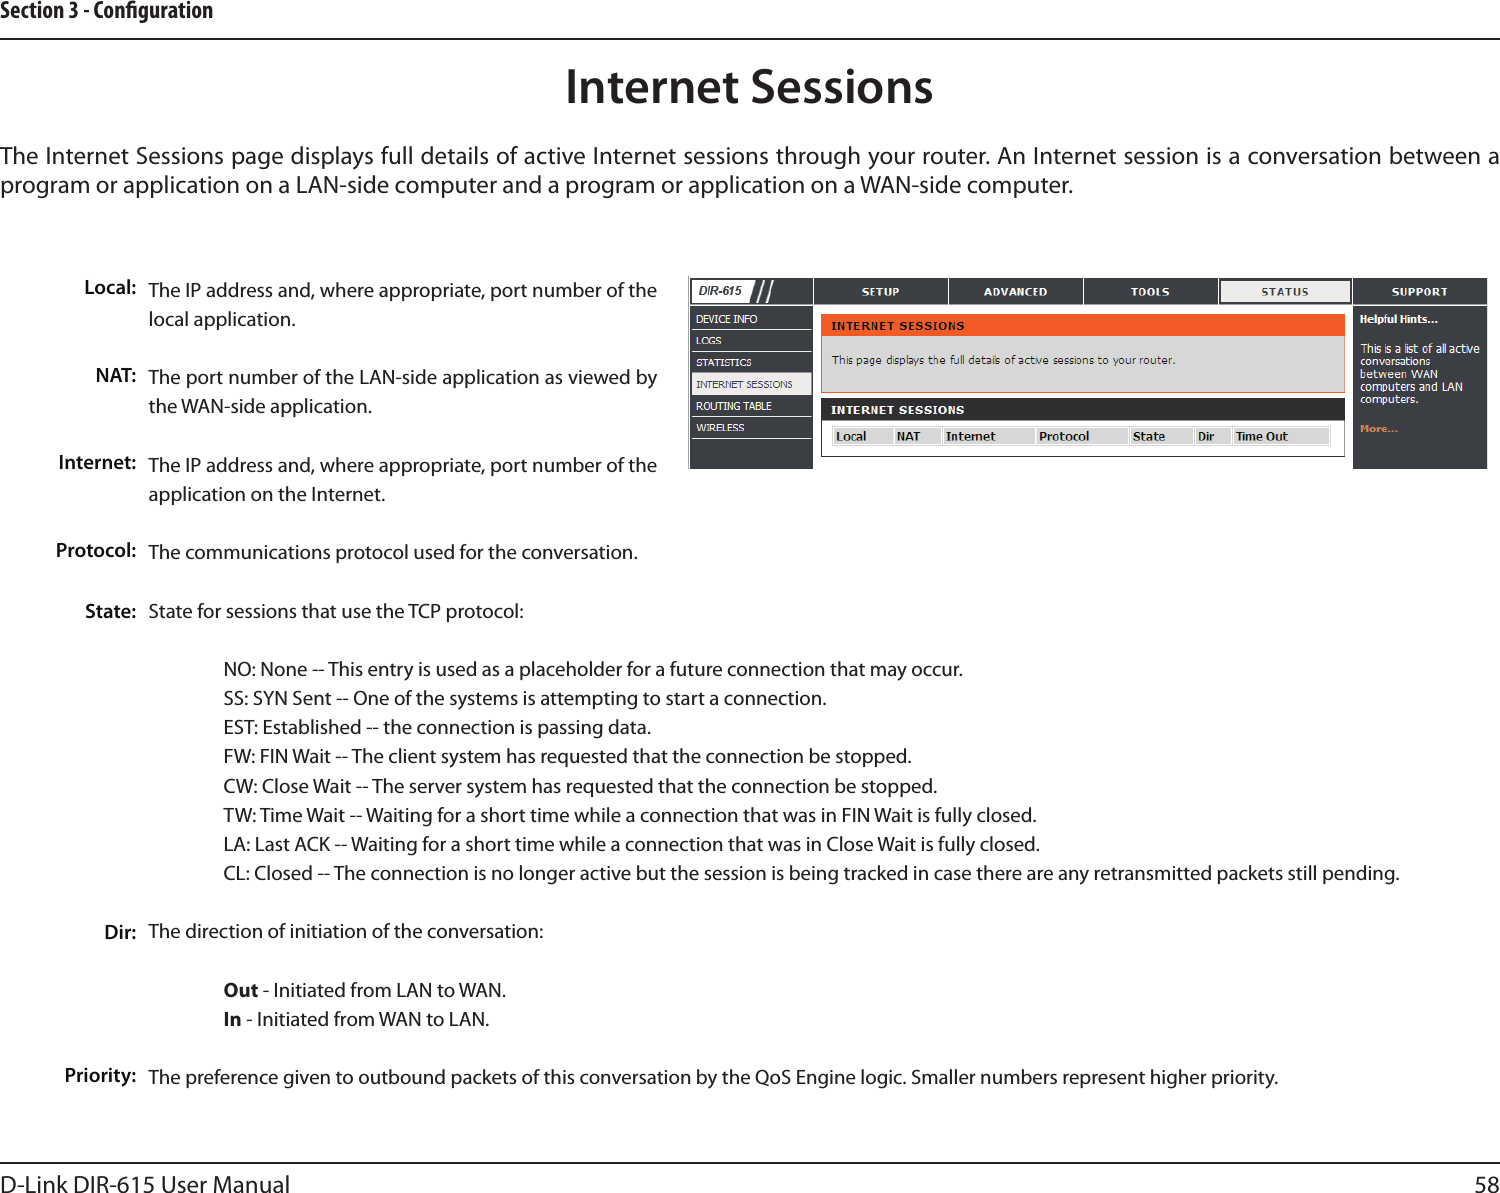 58D-Link DIR-615 User ManualSection 3 - CongurationInternet SessionsThe Internet Sessions page displays full details of active Internet sessions through your router. An Internet session is a conversation between a program or application on a LAN-side computer and a program or application on a WAN-side computer. Local:NAT:Internet:Protocol:State:Dir:Priority:The IP address and, where appropriate, port number of the local application. The port number of the LAN-side application as viewed by the WAN-side application. The IP address and, where appropriate, port number of the application on the Internet. The communications protocol used for the conversation. State for sessions that use the TCP protocol:  NO: None -- This entry is used as a placeholder for a future connection that may occur.  SS: SYN Sent -- One of the systems is attempting to start a connection.  EST: Established -- the connection is passing data.  FW: FIN Wait -- The client system has requested that the connection be stopped.  CW: Close Wait -- The server system has requested that the connection be stopped.  TW: Time Wait -- Waiting for a short time while a connection that was in FIN Wait is fully closed.  LA: Last ACK -- Waiting for a short time while a connection that was in Close Wait is fully closed.  CL: Closed -- The connection is no longer active but the session is being tracked in case there are any retransmitted packets still pending.The direction of initiation of the conversation:   Out - Initiated from LAN to WAN.  In - Initiated from WAN to LAN.The preference given to outbound packets of this conversation by the QoS Engine logic. Smaller numbers represent higher priority. 